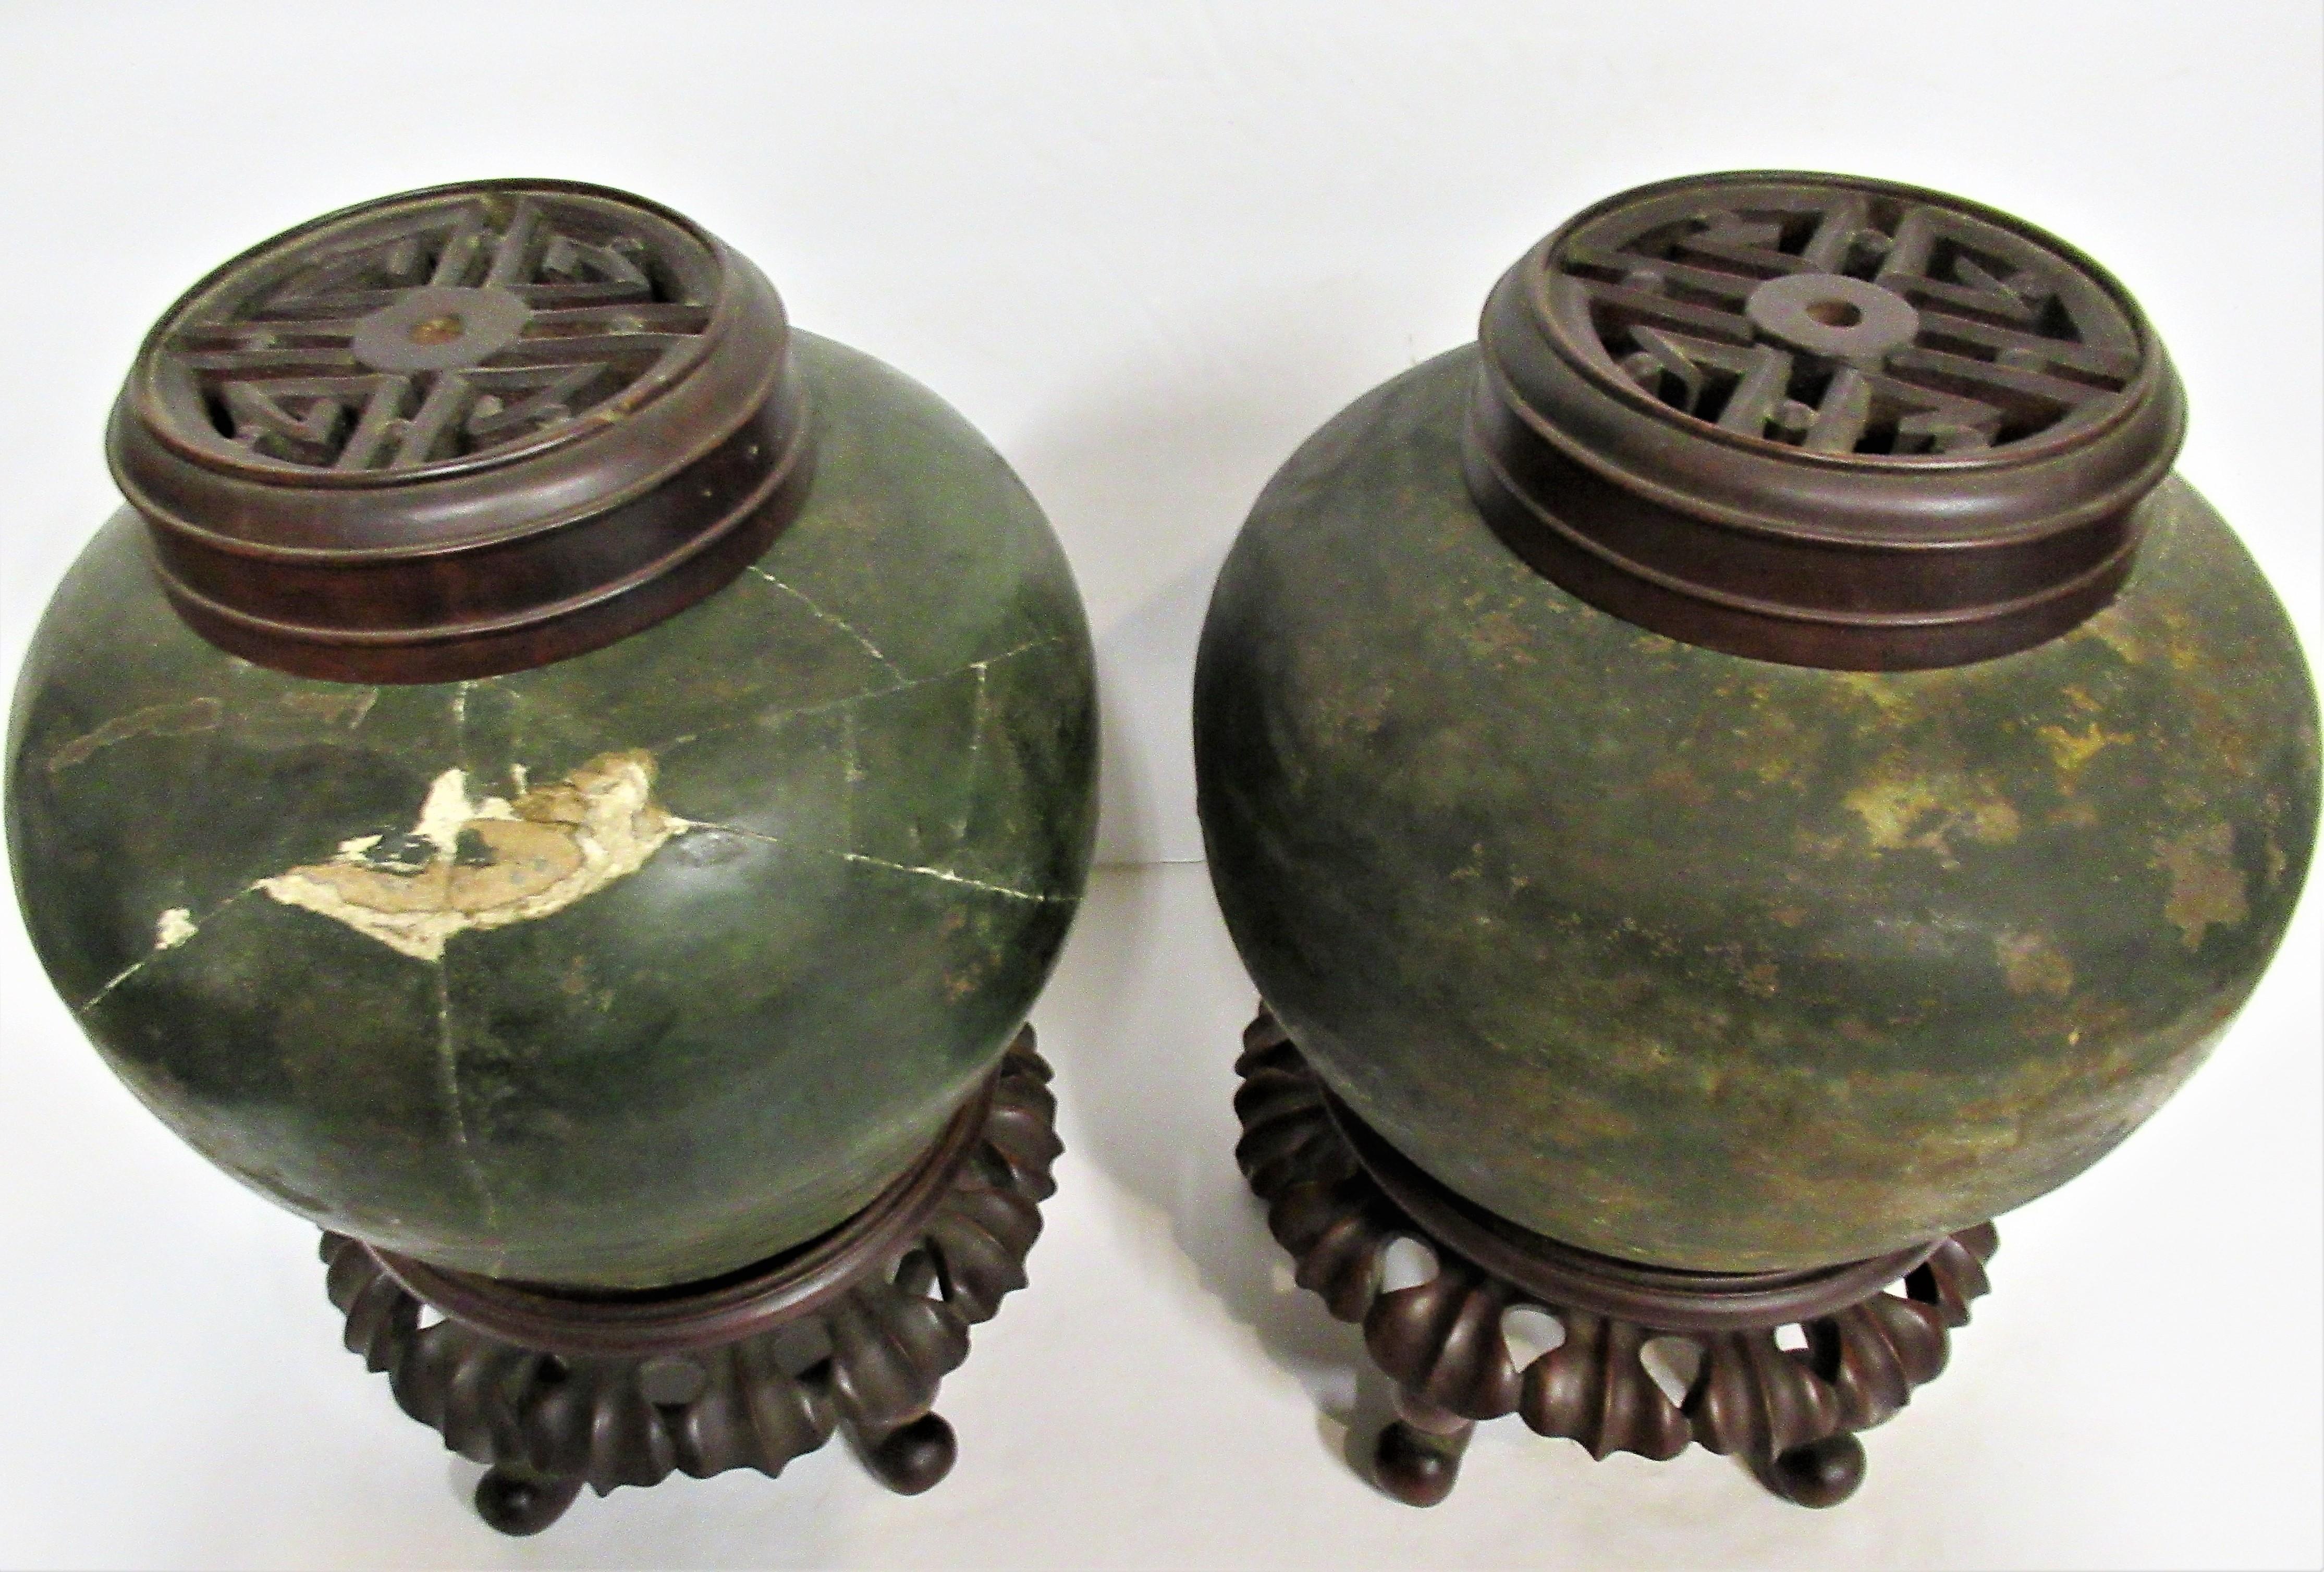 Carved Early Antique Chinese Tea Jars